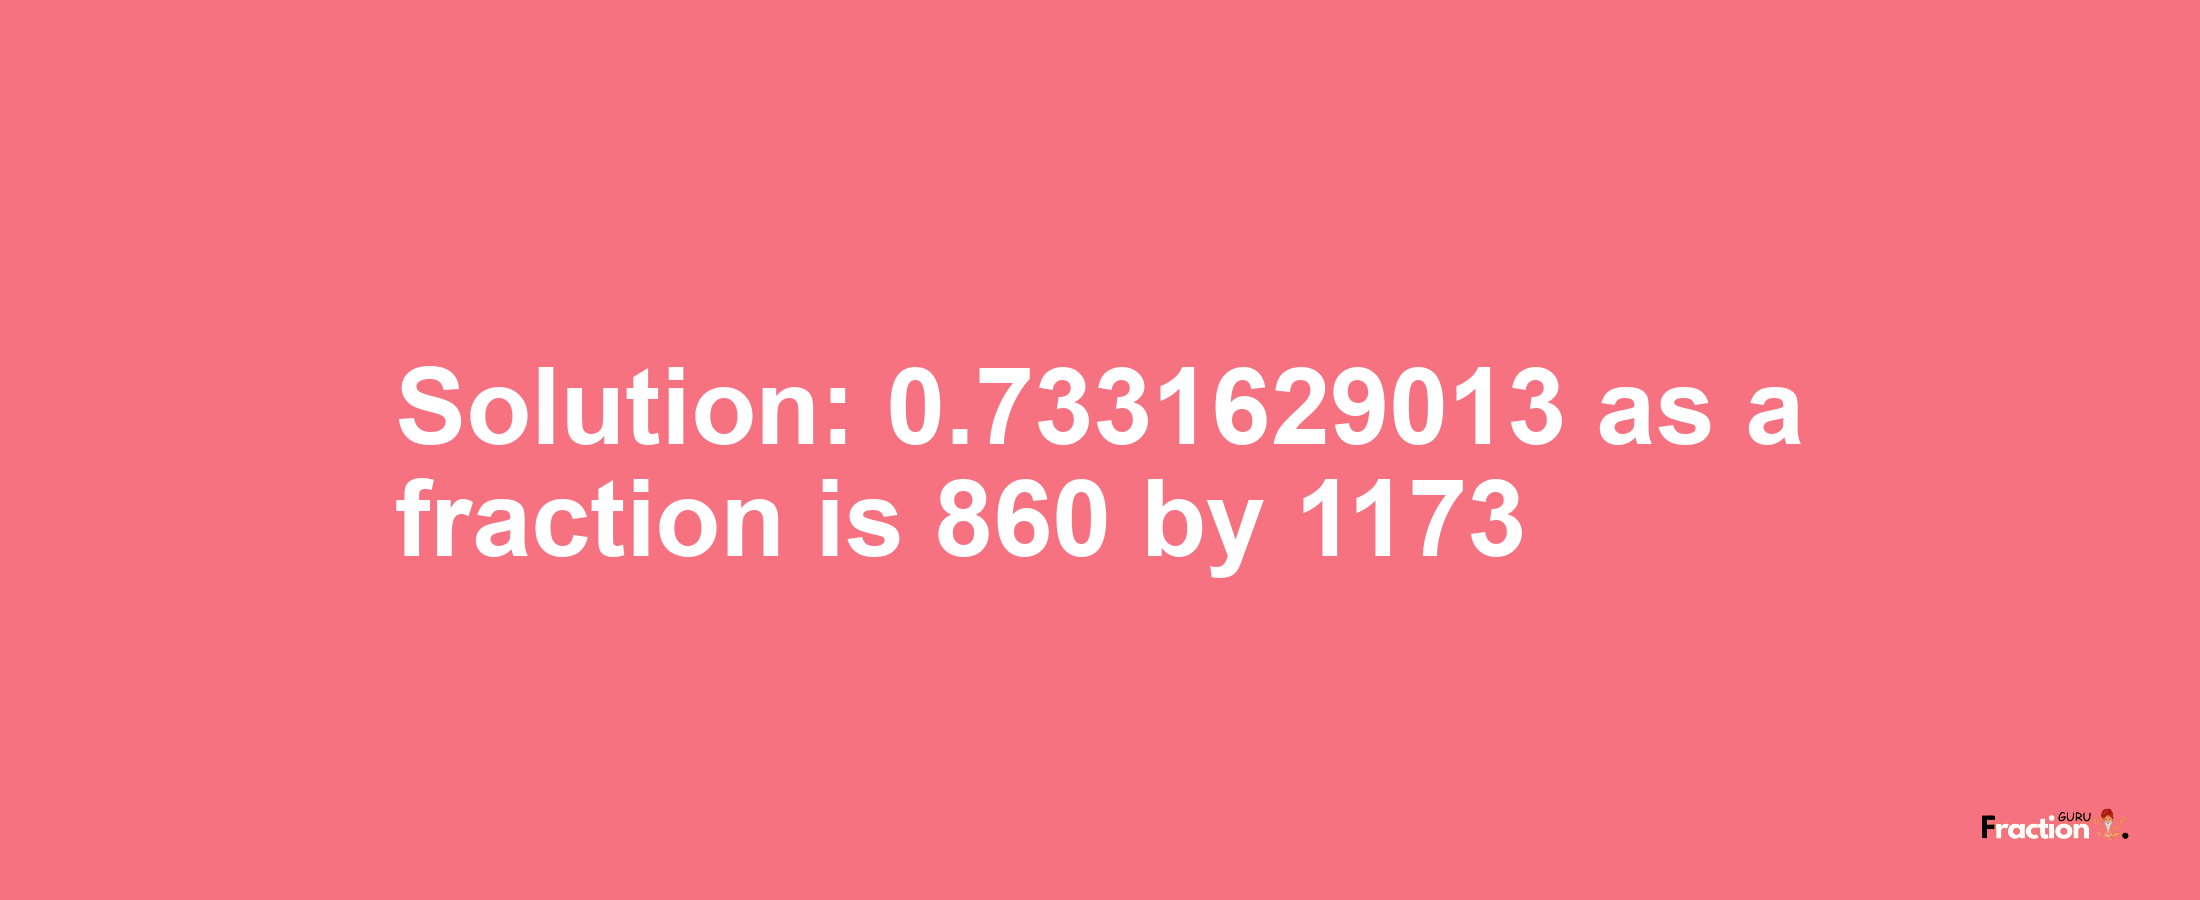 Solution:0.7331629013 as a fraction is 860/1173